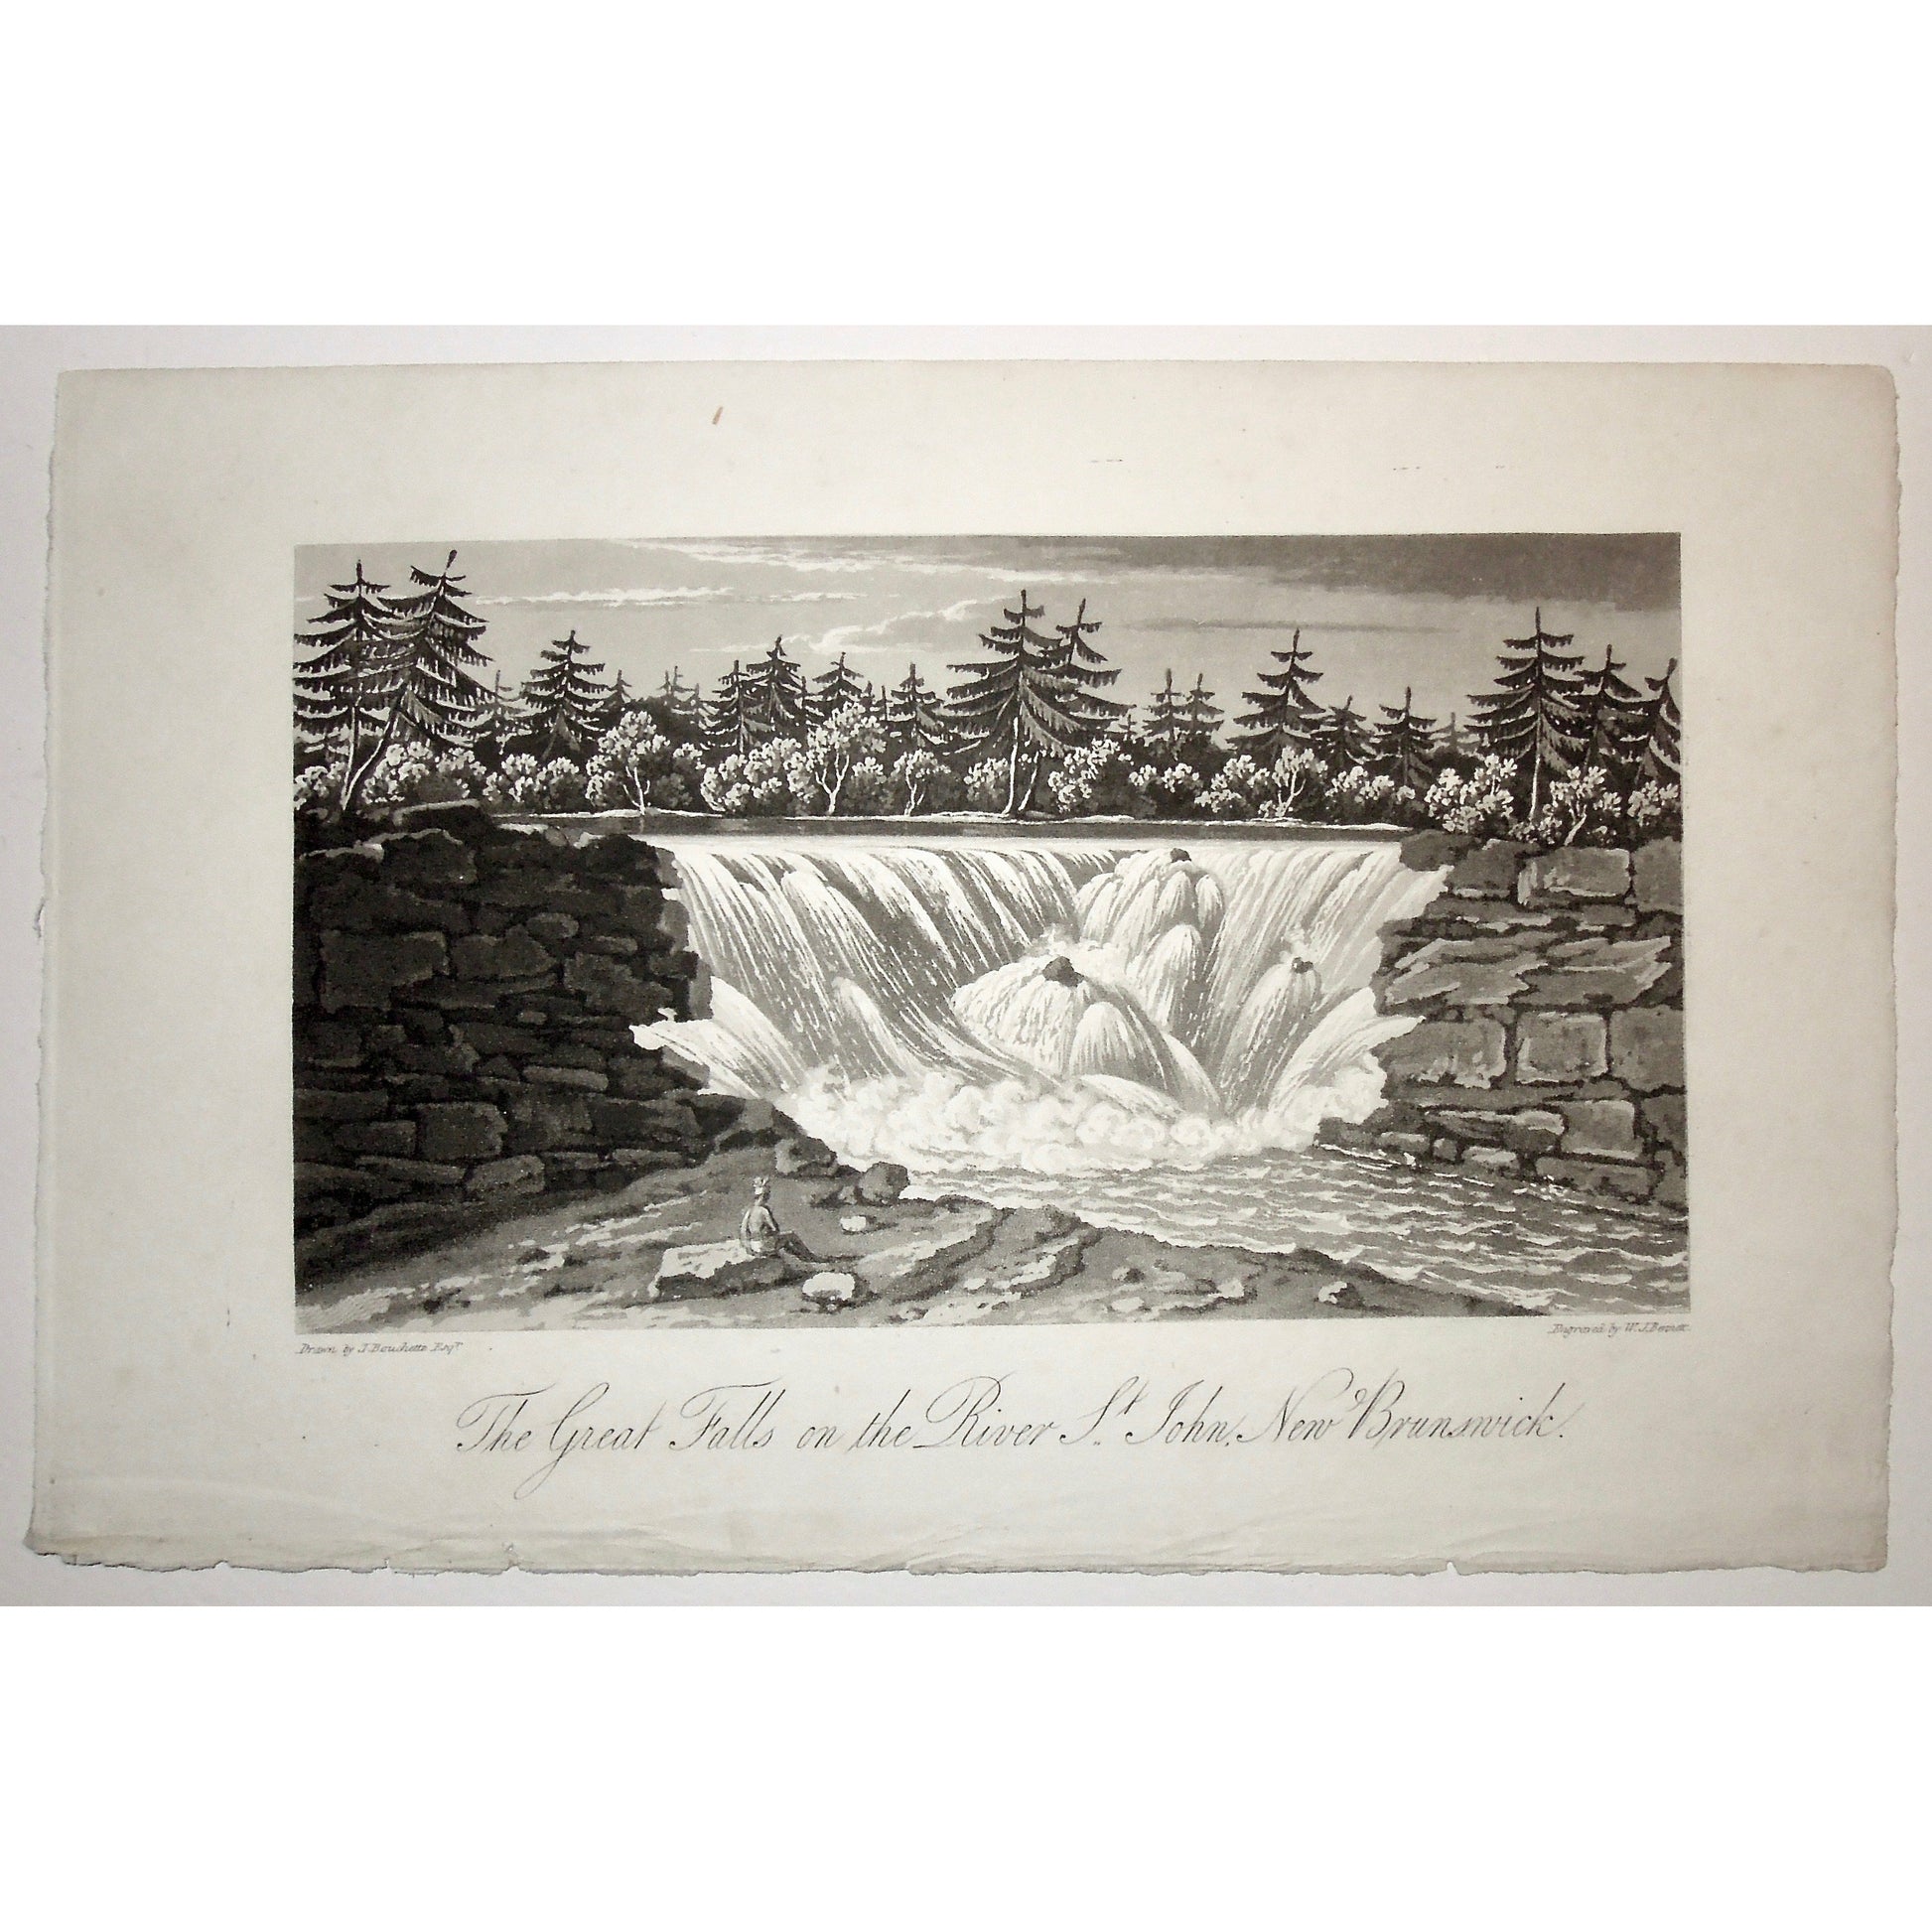 Great Falls, Great, Falls, River St. John, St. John's River, St. John's, New Brunswick, Waterfall, Falls, native, waterway, A Topographical Description of the Province of Lower Canada, Lower Canada, Joseph Bouchette, Bouchette, 1815, W. Faden, Faden, W. J. Bennett, Bennett, Charing Cross, London, steel engraving, black and white, Antique Prints, Antiques, Prints, Old Art, Engraving, Canadiana, History, Art, Artwork, Decor, Home decor, 